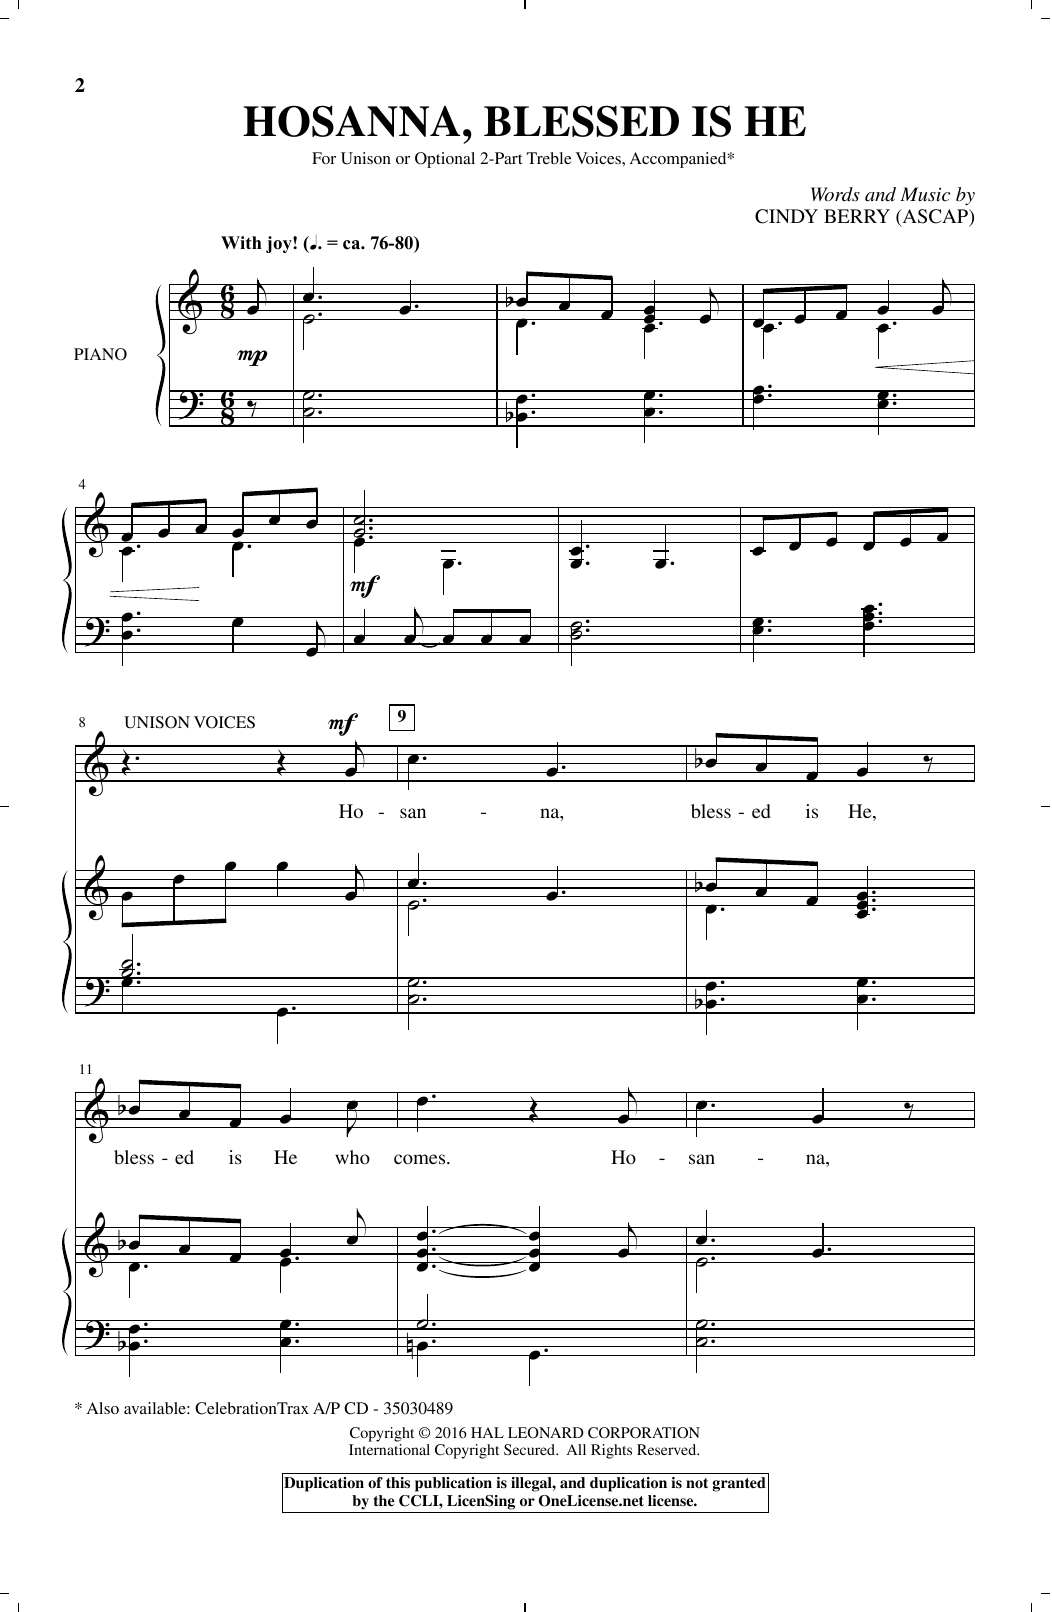 Download Cindy Berry Hosanna, Blessed Is He Sheet Music